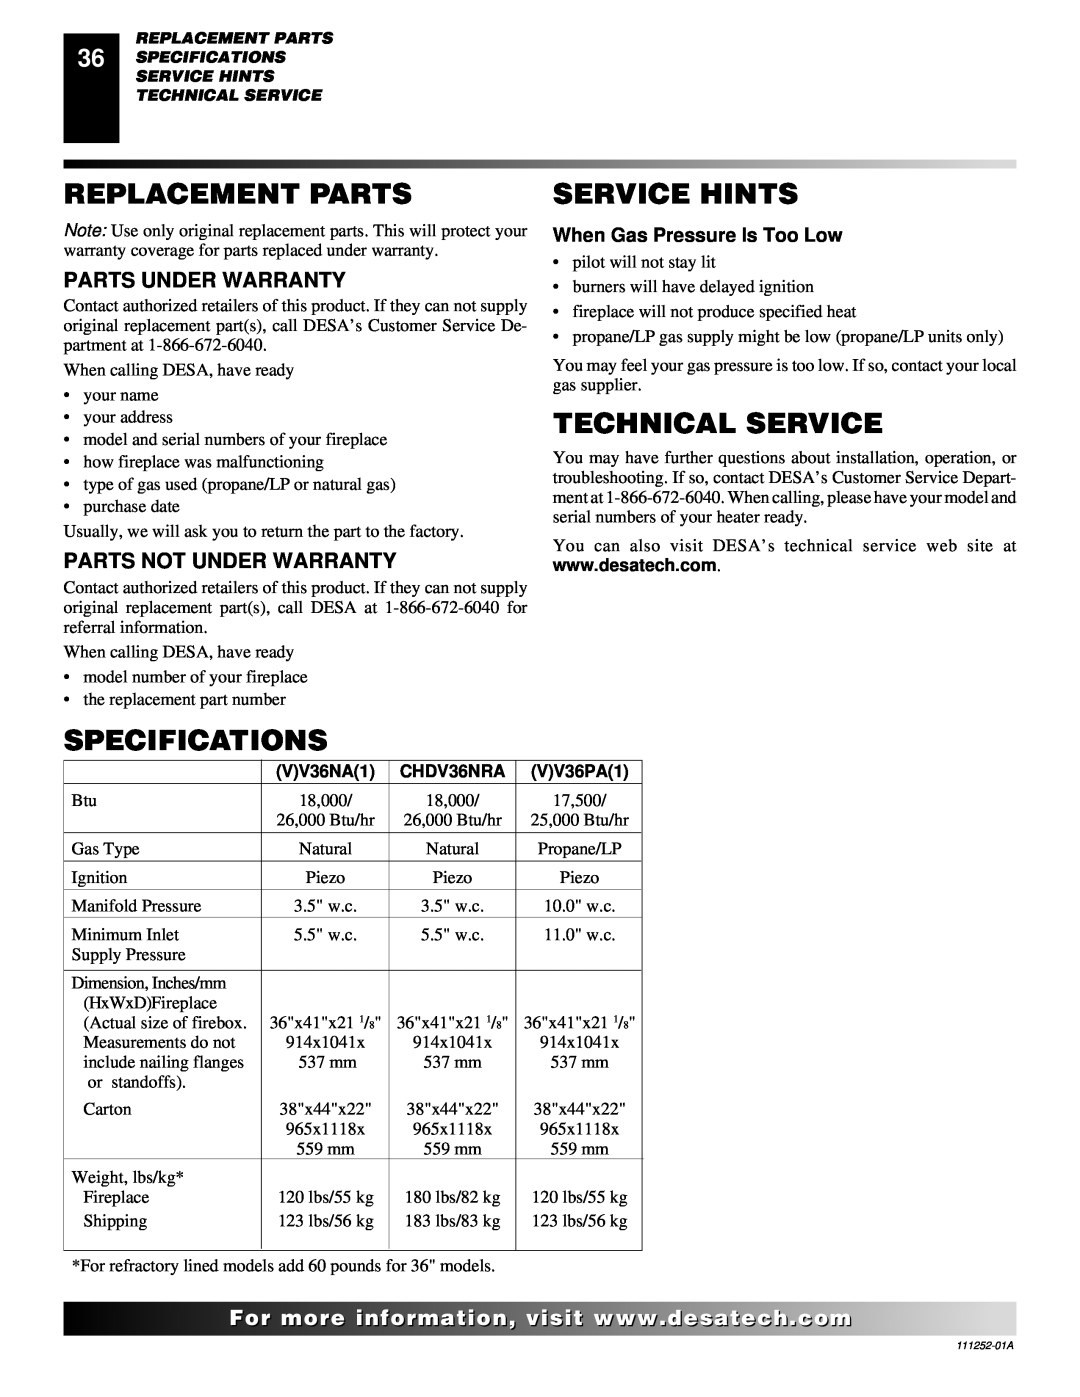 Desa CHDV36NRA Replacement Parts, Service Hints, Technical Service, Specifications, Parts Under Warranty 